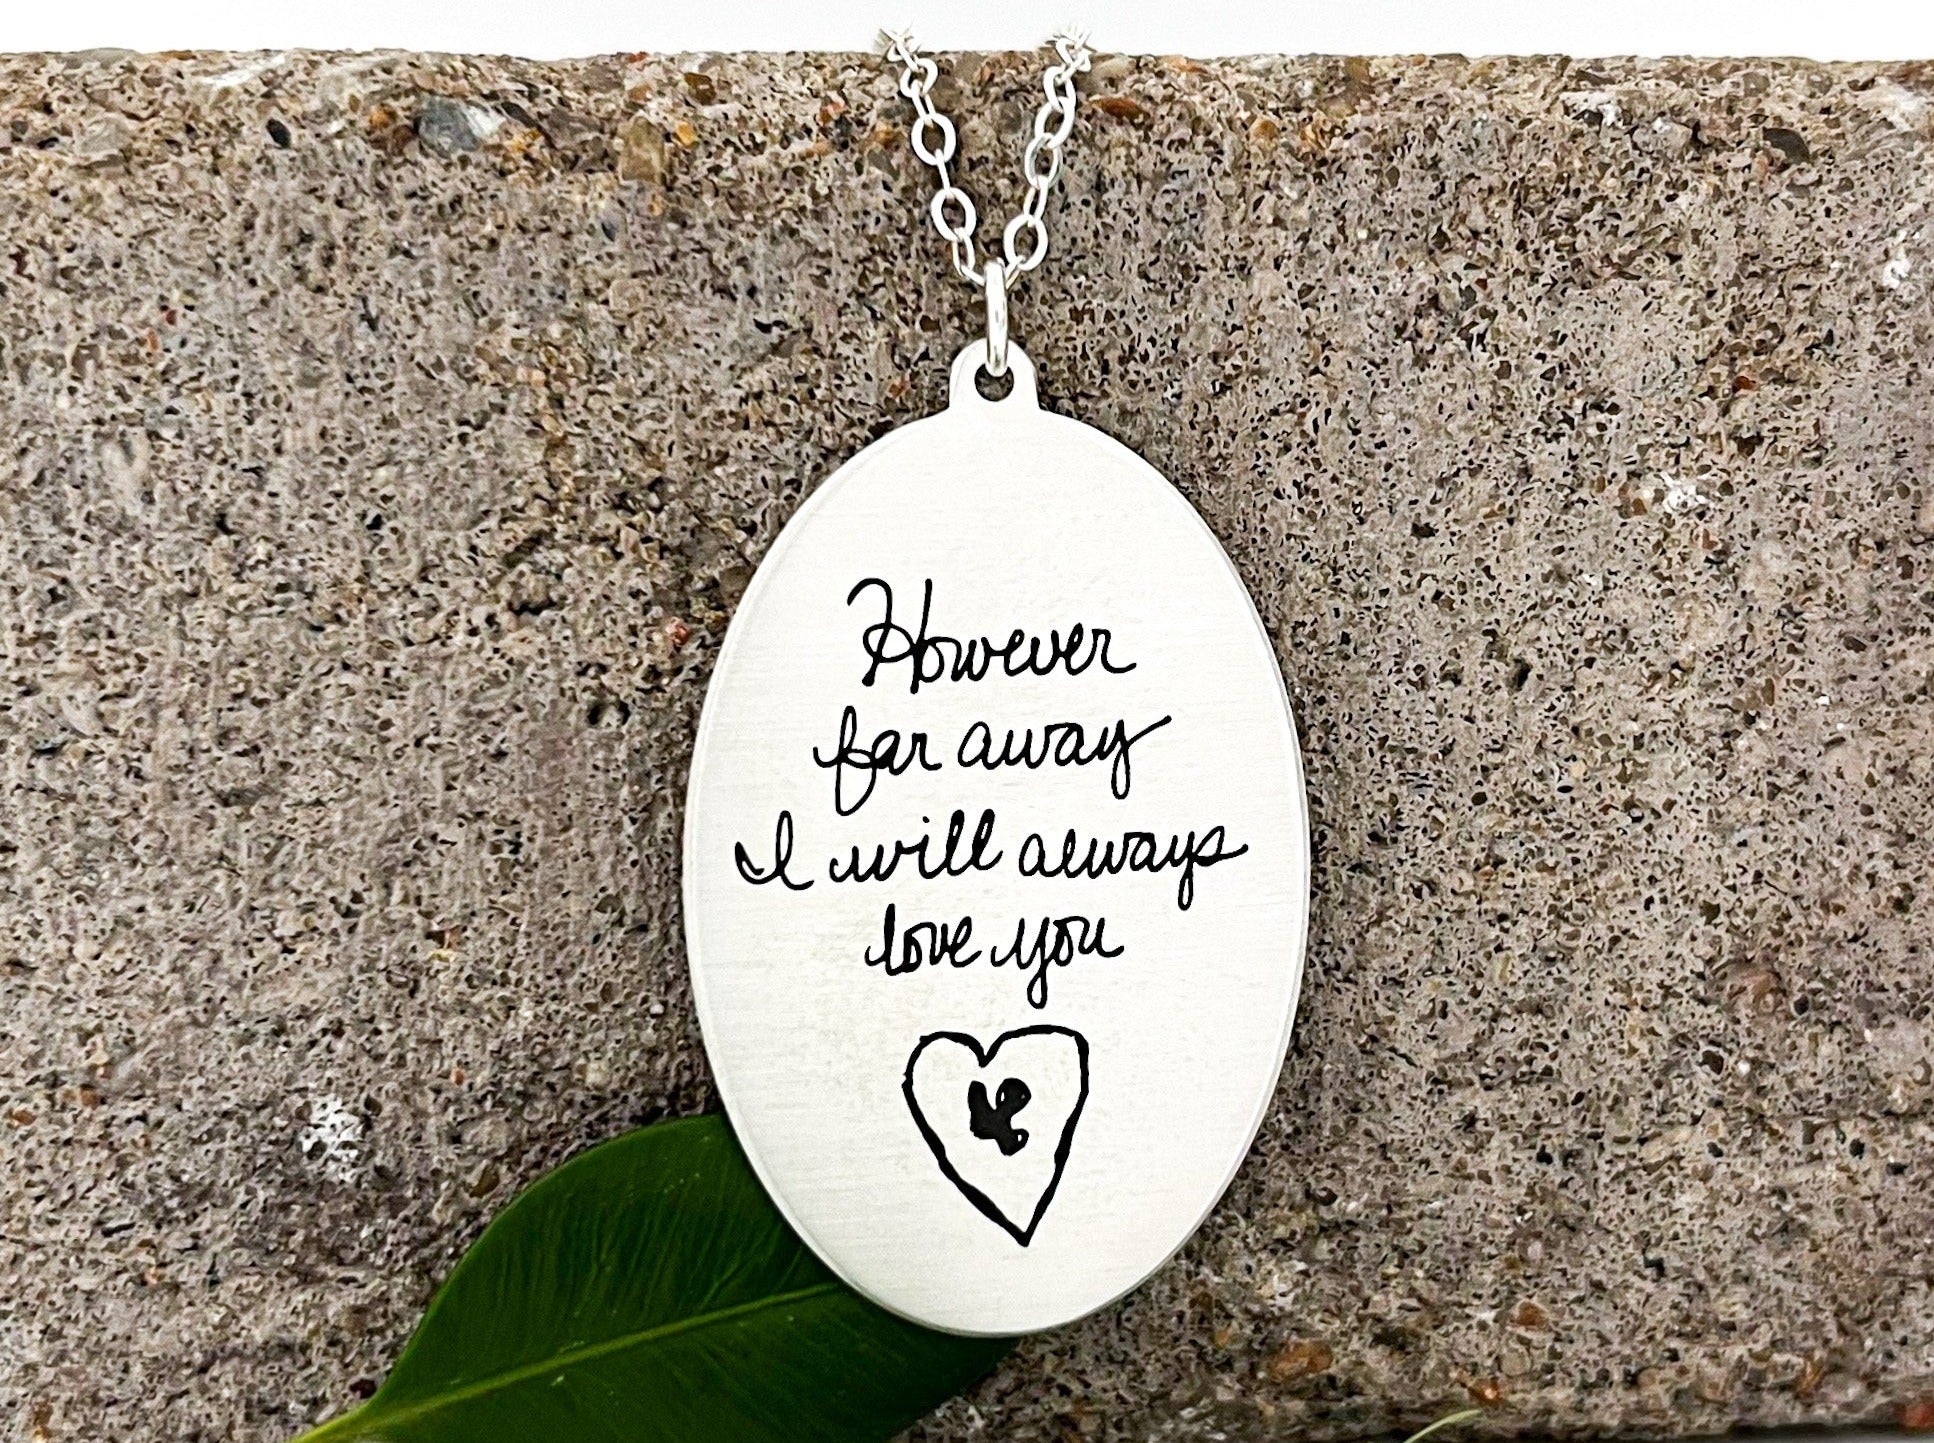 Casey Necklace | Memorial Necklace Engraved With Your Writing, Fingerprints and Doodles | Large Oval Shaped | Scripted Jewelry | House of Jaco